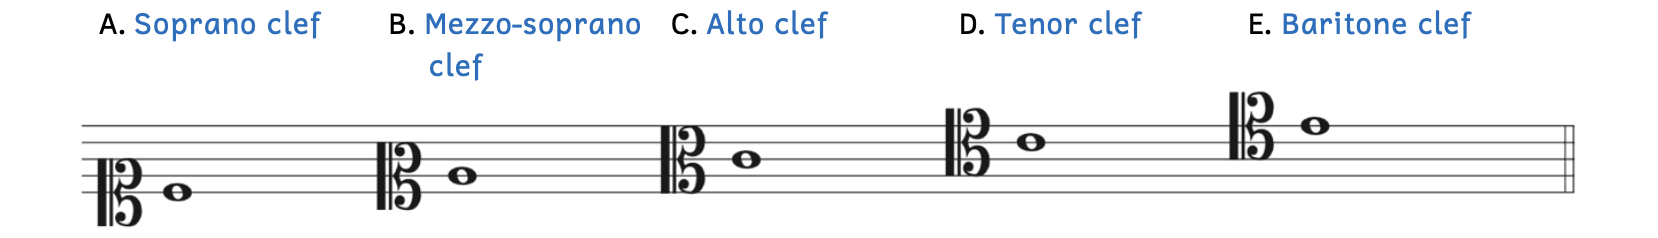 Illustration of different moveable C clefs. Example A shows the soprano clef, where C4 is the first line on the staff. Example B shows the mezzosoprano clef, where C4 is the second line on the staff. Example C shows the alto clef, where C4 is the third line on the staff. Example D shows the tenor clef, where C4 is the fourth line on the staff. Example E shows the baritone clef, where C4 is the fifth line on the staff.